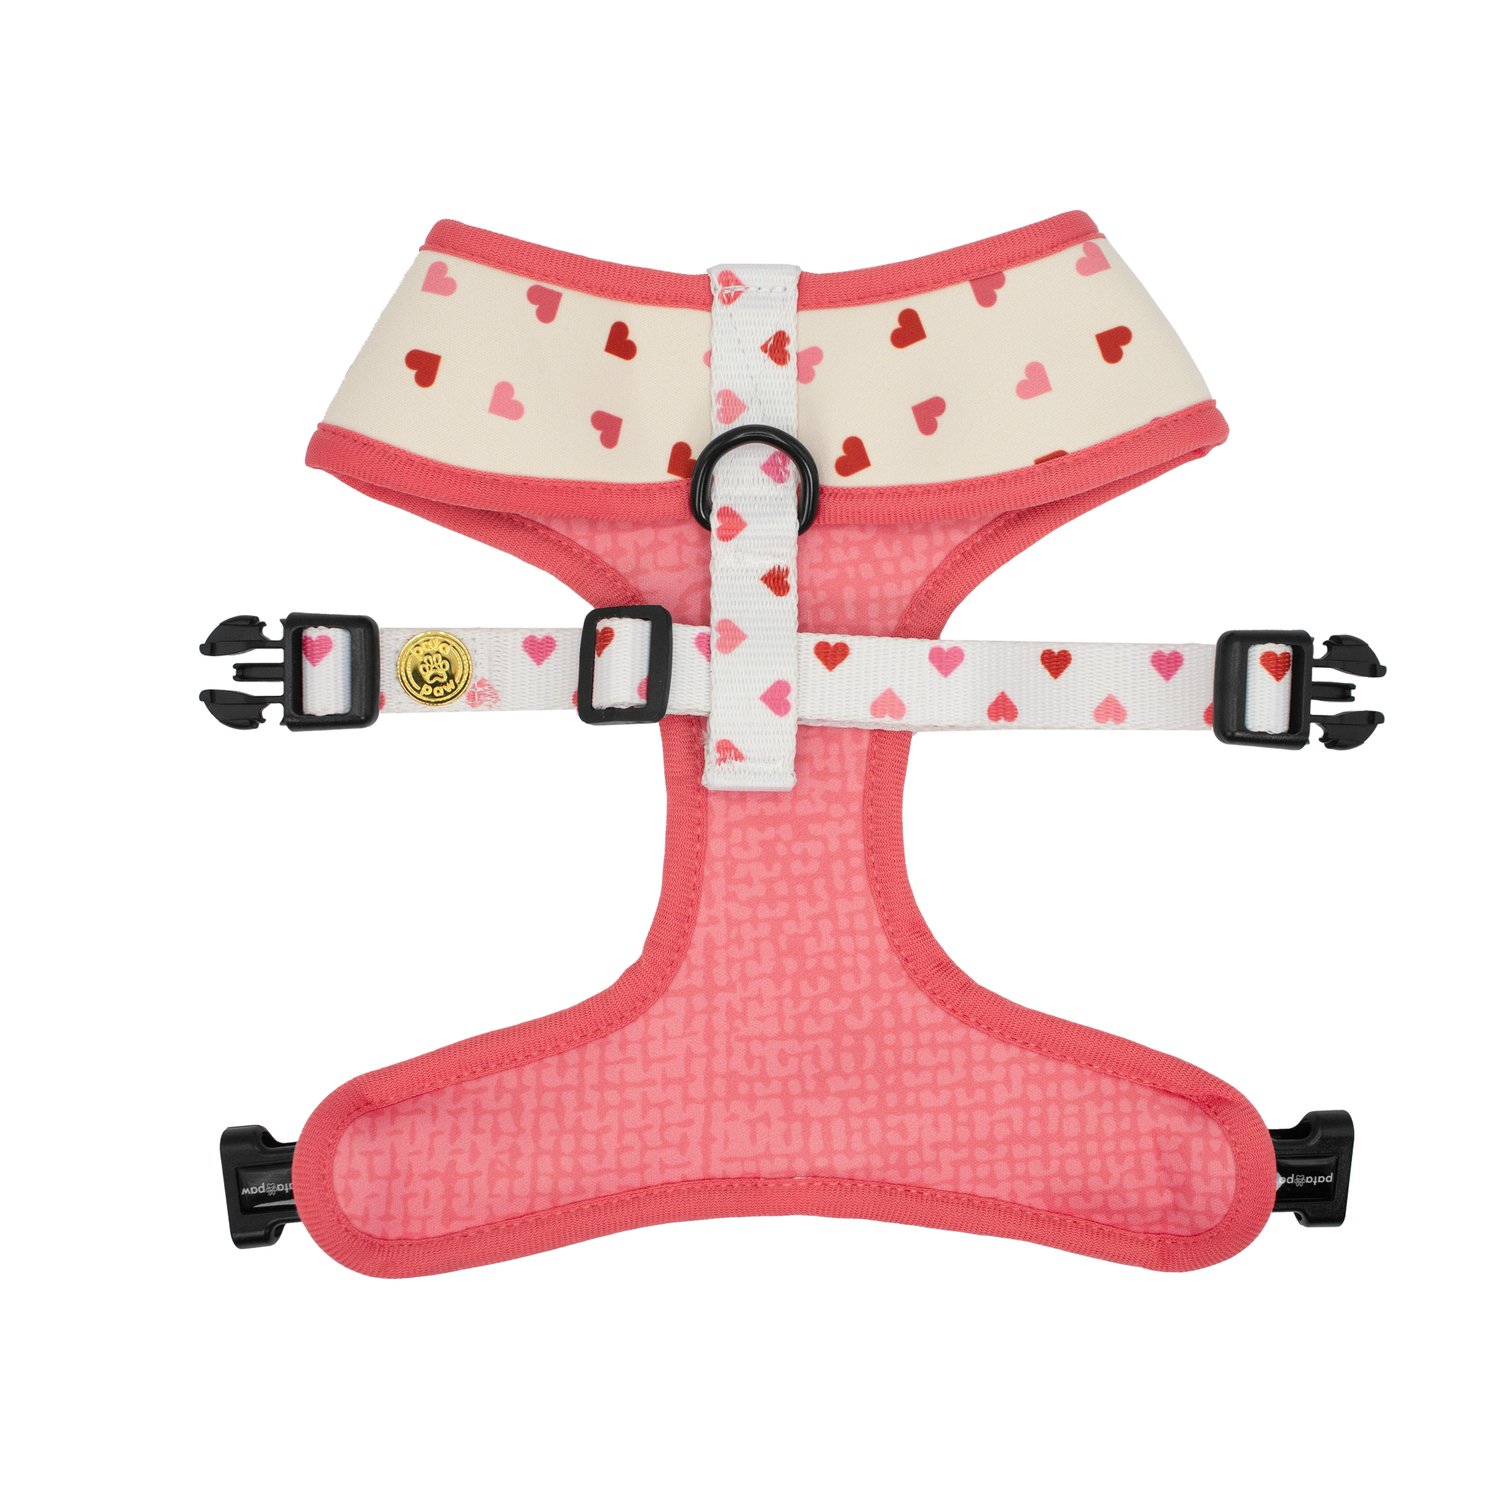 Pata Paw blush hearts reversible harness showing its backside.